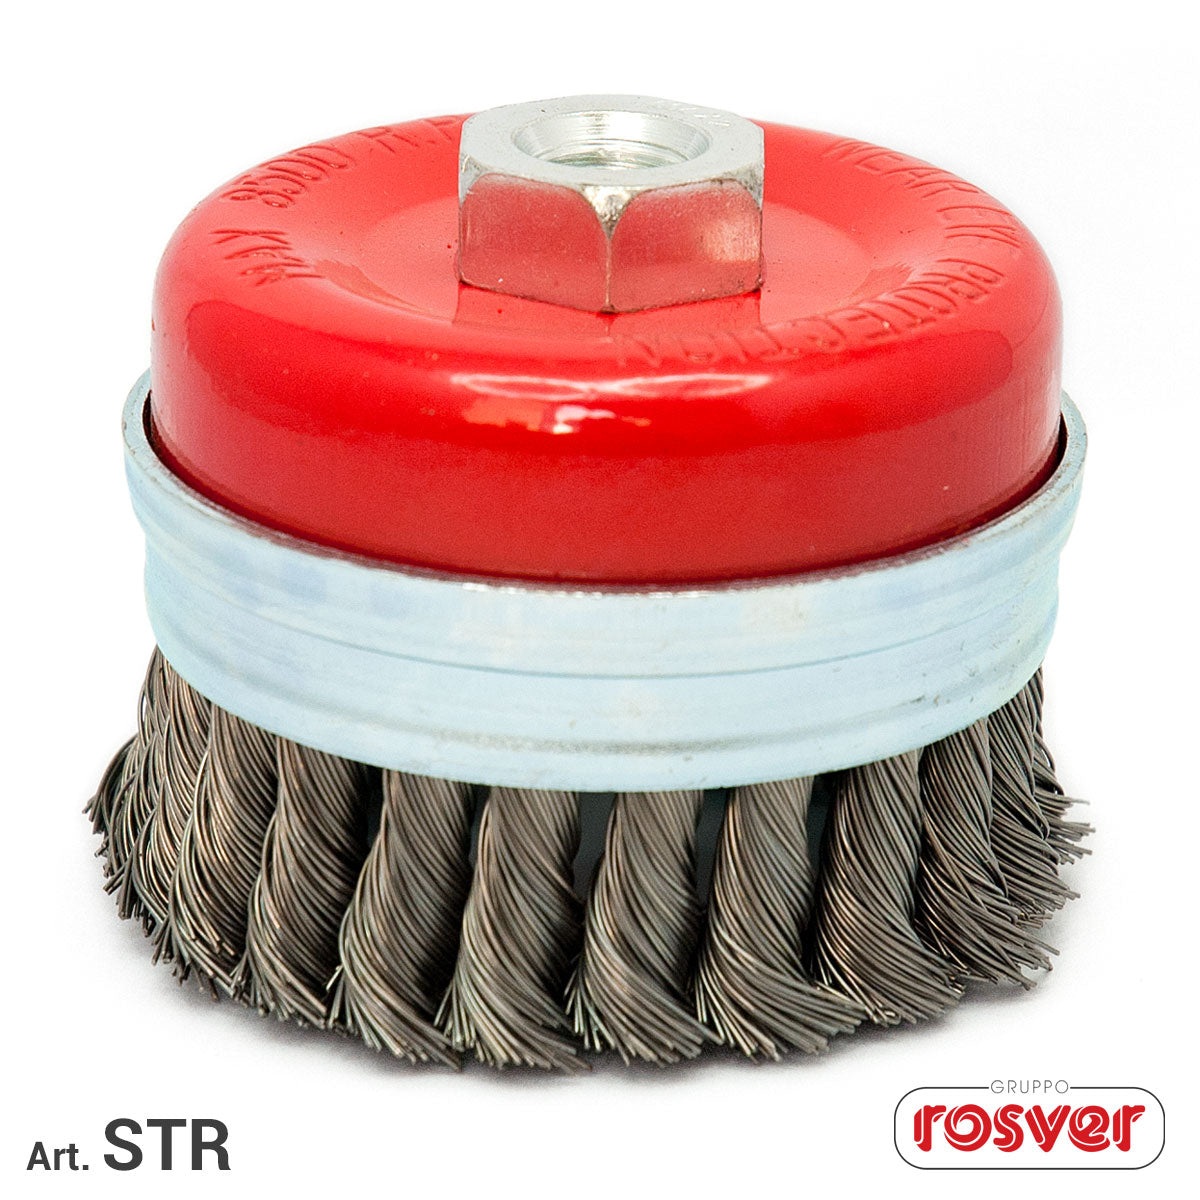 Twisted Knots Reinforced Cup Brush - Rosver - STR F.M14 Acciaio - Conf.1pz